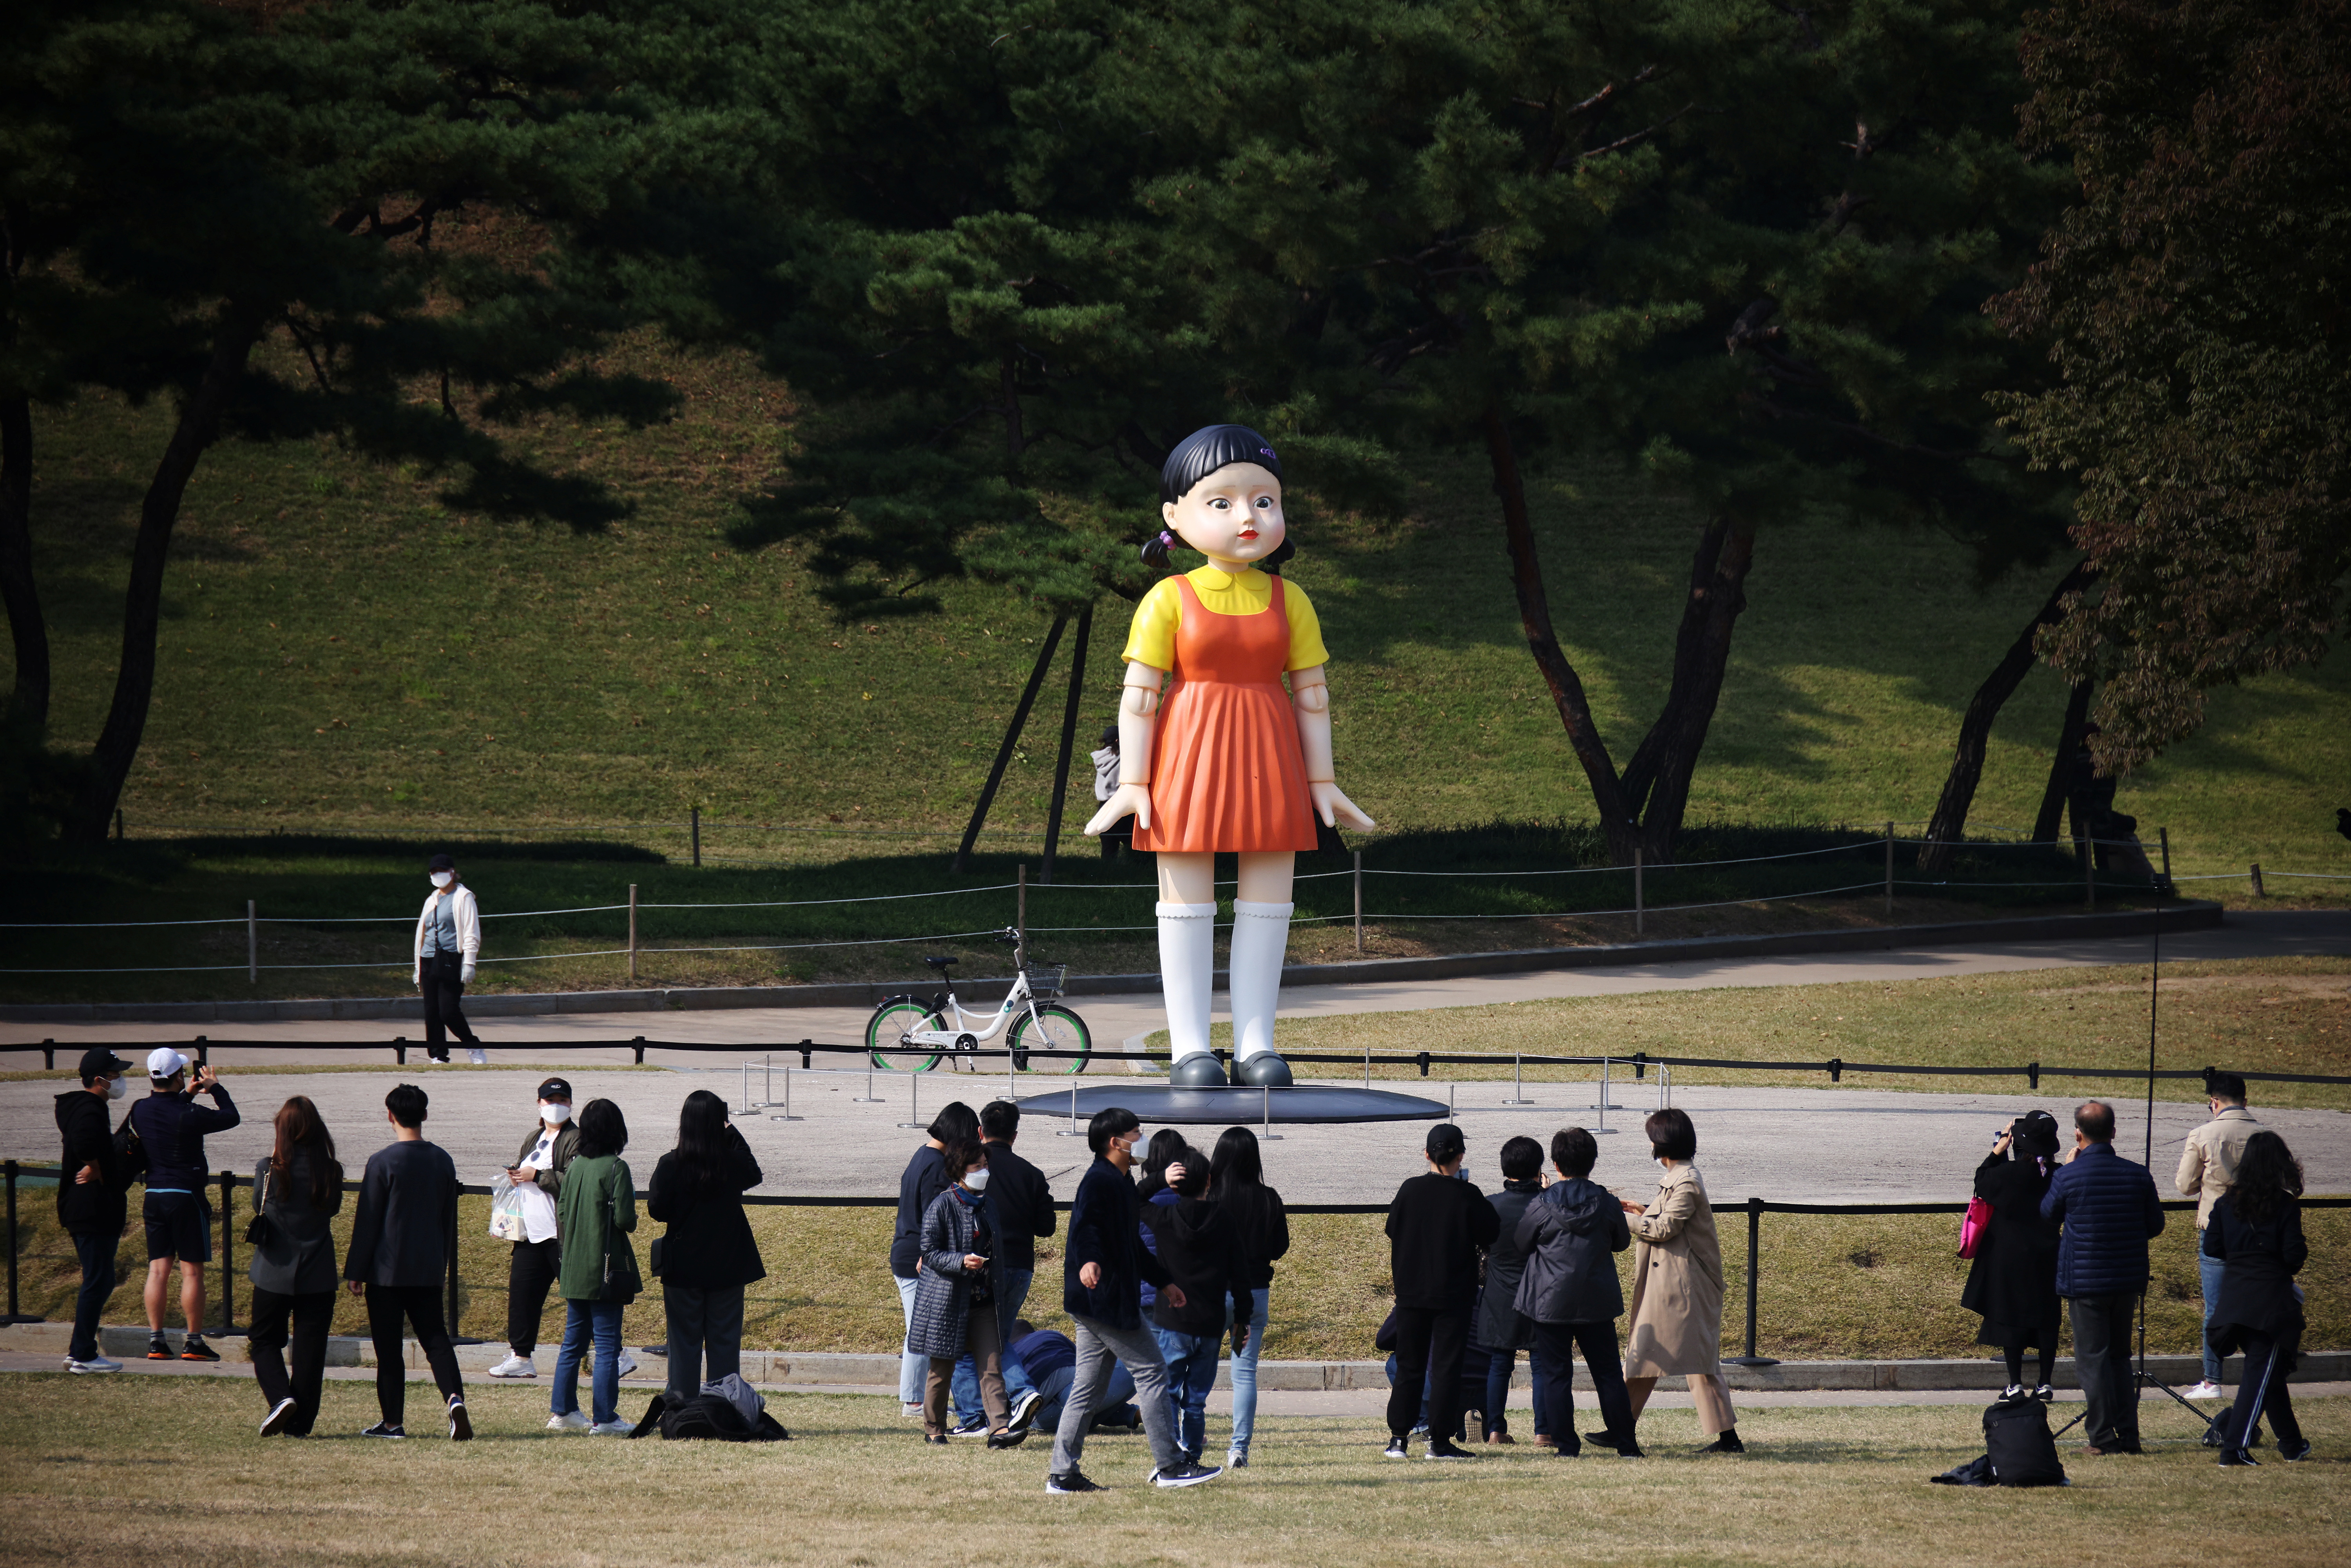 A giant doll named 'Younghee' from Netflix series 'Squid Game' is on display at a park in Seoul